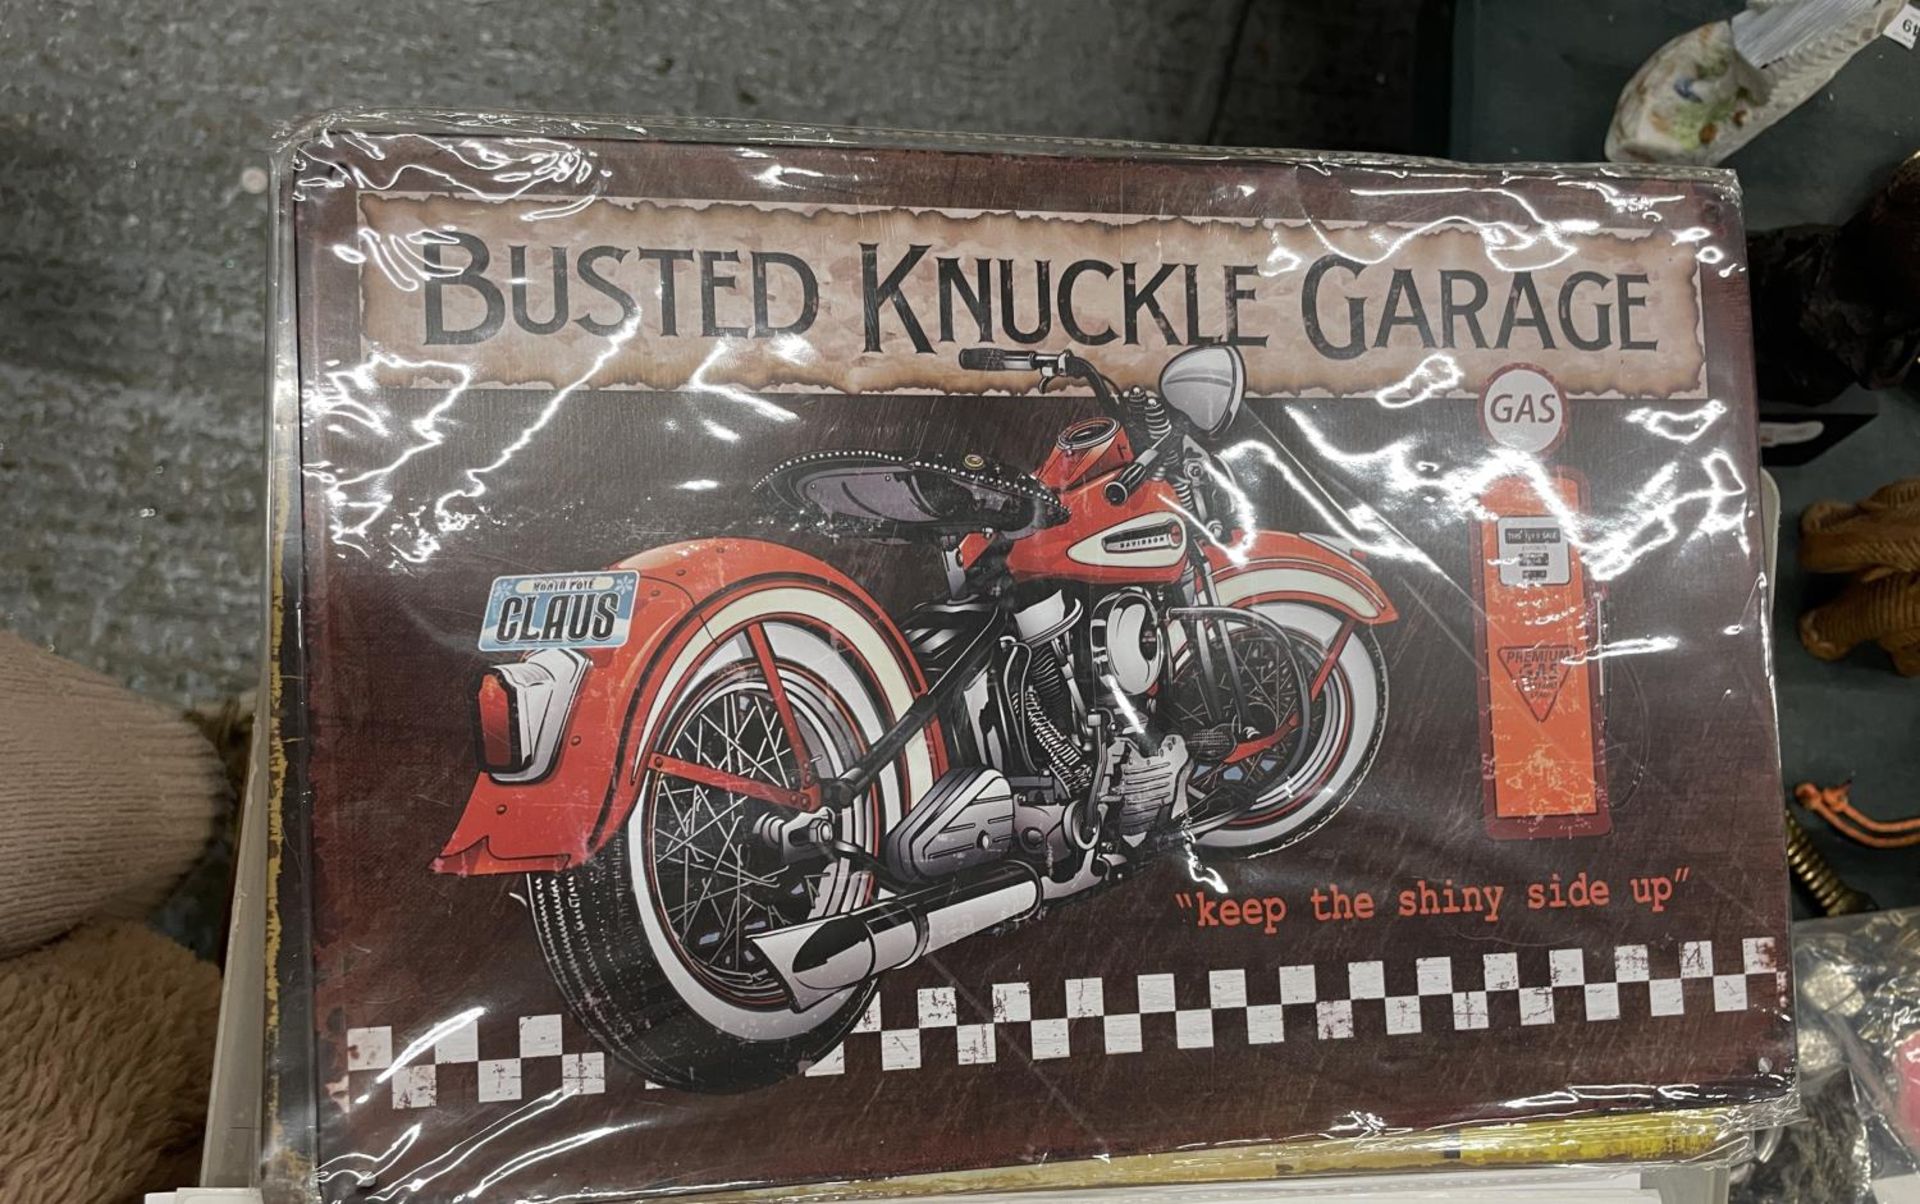 A TIN BUSTED KNUCKLE GARAGE SIGN